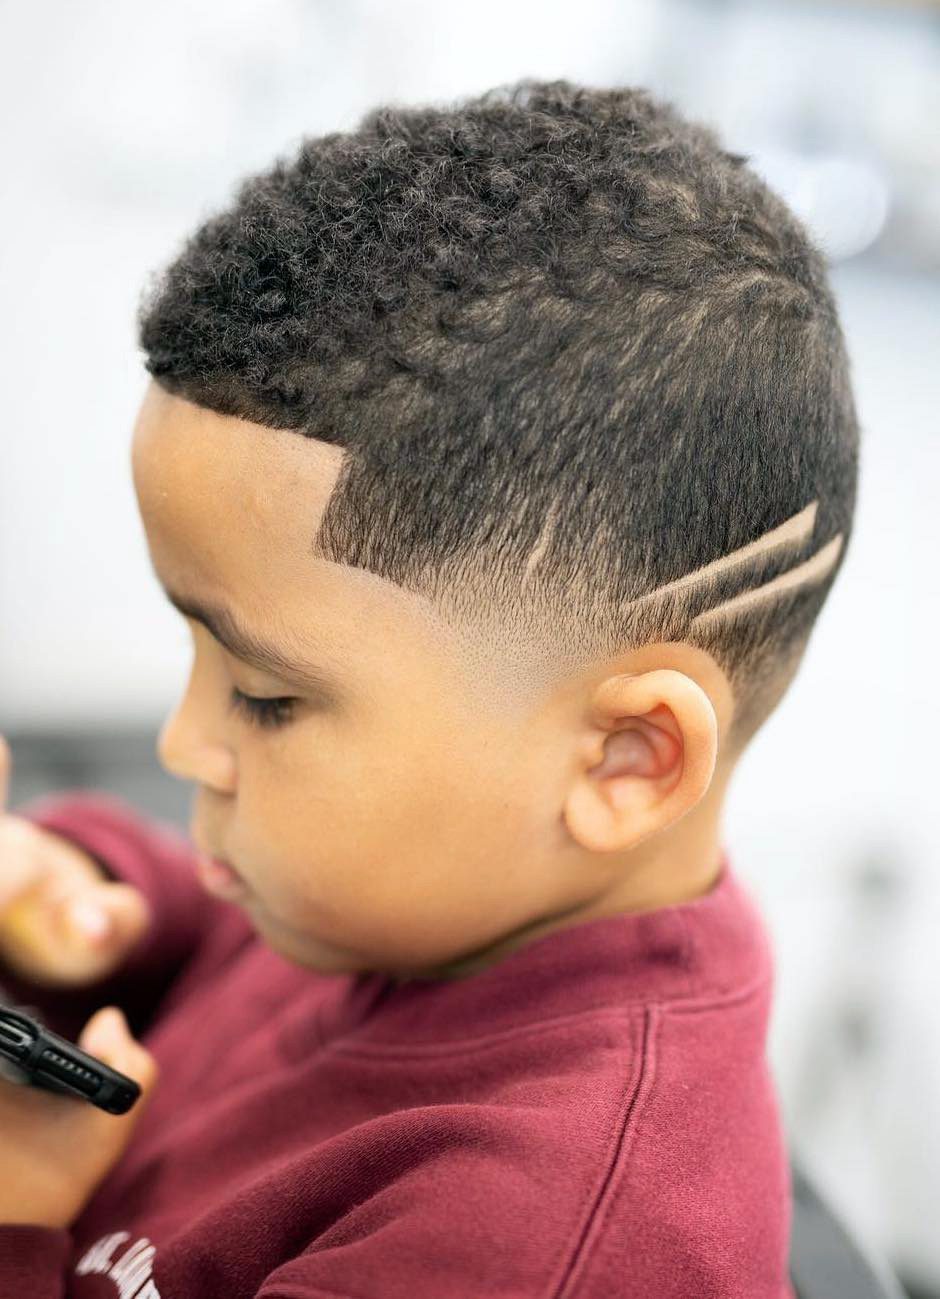 100 Excellent School Haircuts For Boys Styling Tips Or is it one in which the definition of beauty gets stretched so far that it becomes meaningless? 100 excellent school haircuts for boys